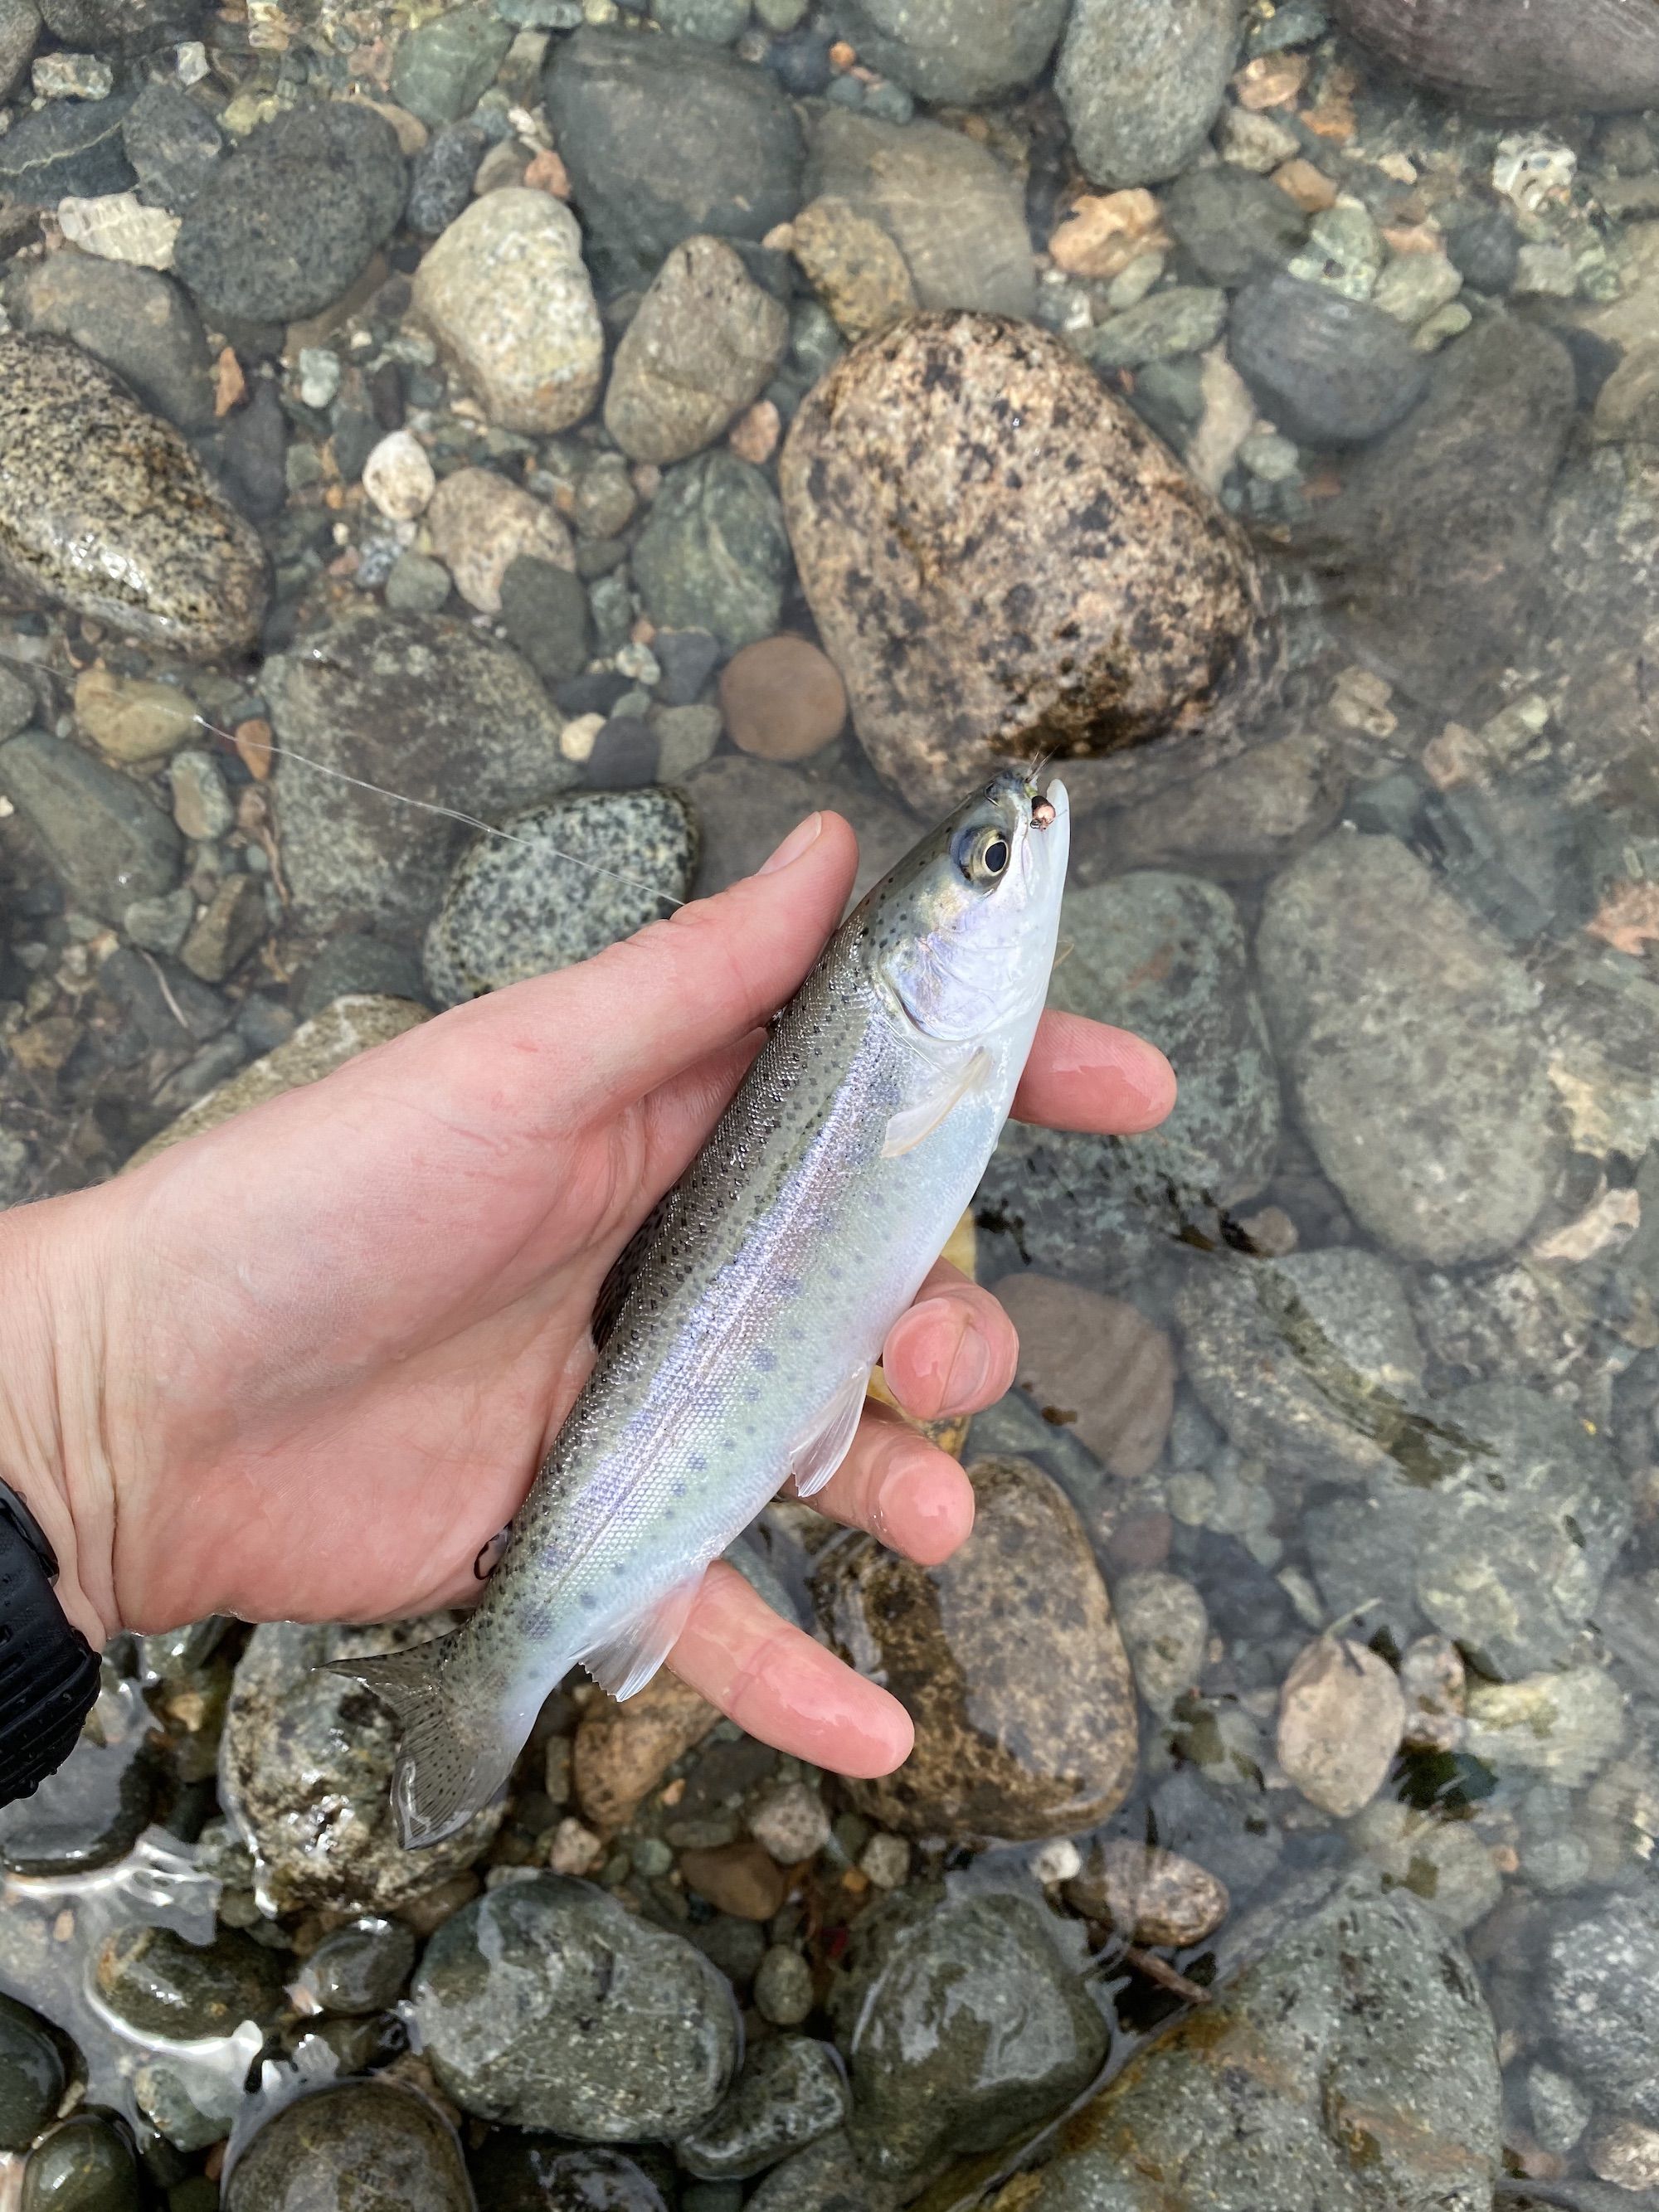 A small rainbow trout with a nymph fly in its mouth